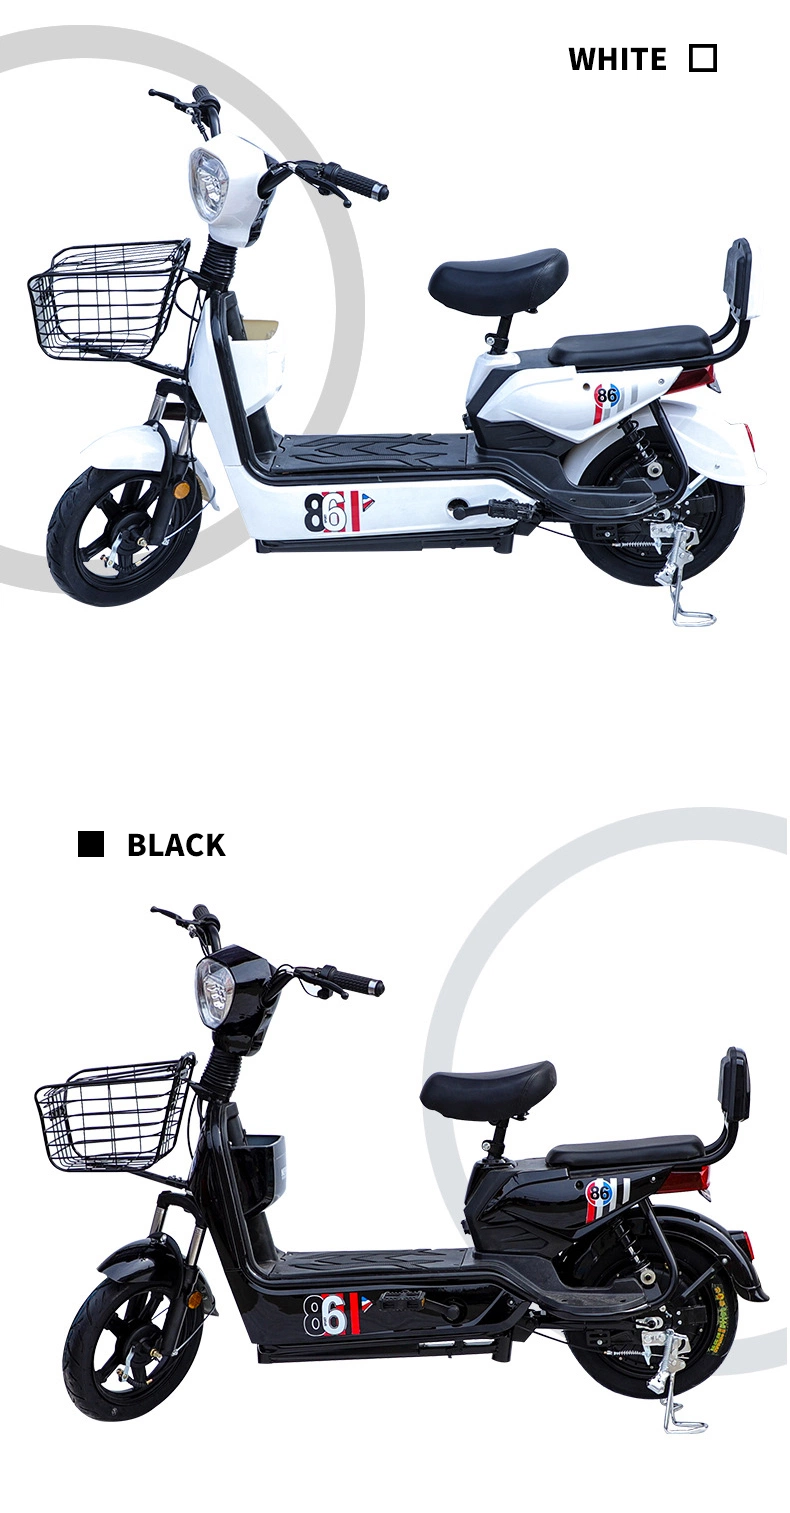 Ready to Ship 48V 350W Motor 14 Inch Fat Tire Electric Bicycle 12ah Battery Not Folding Electric Bike for Adult